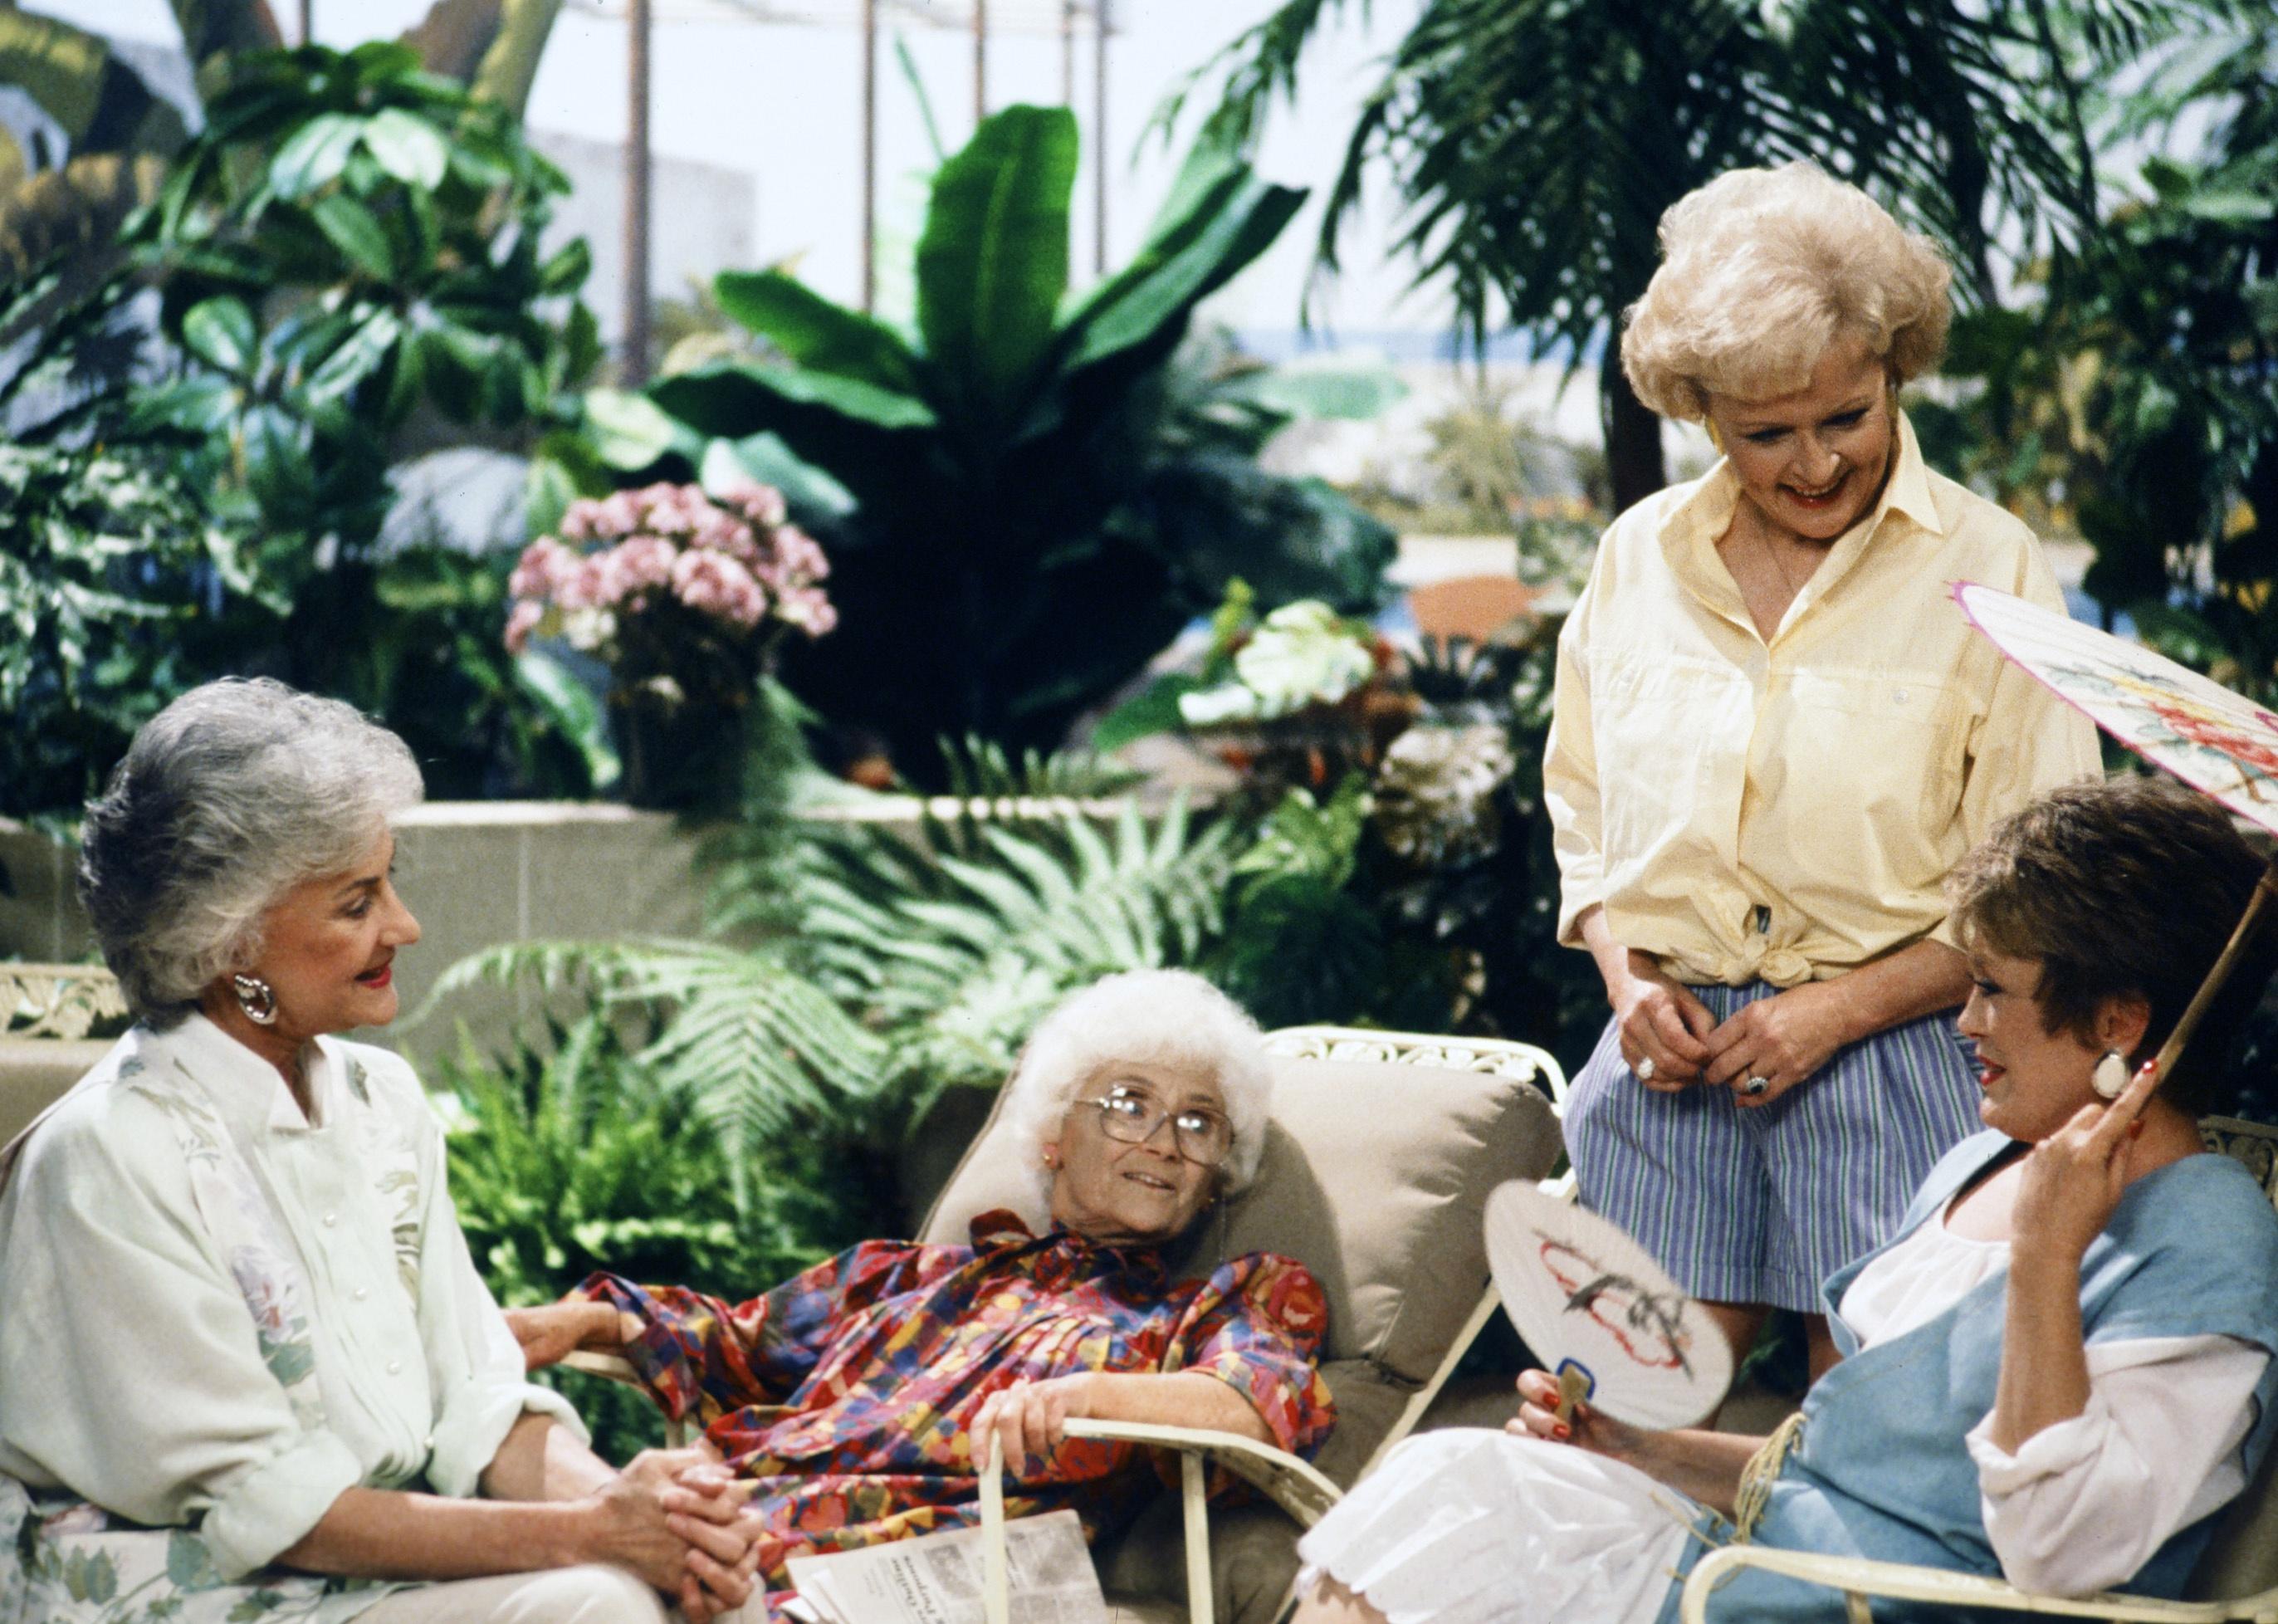 The Golden Girls sitting on a patio talking.